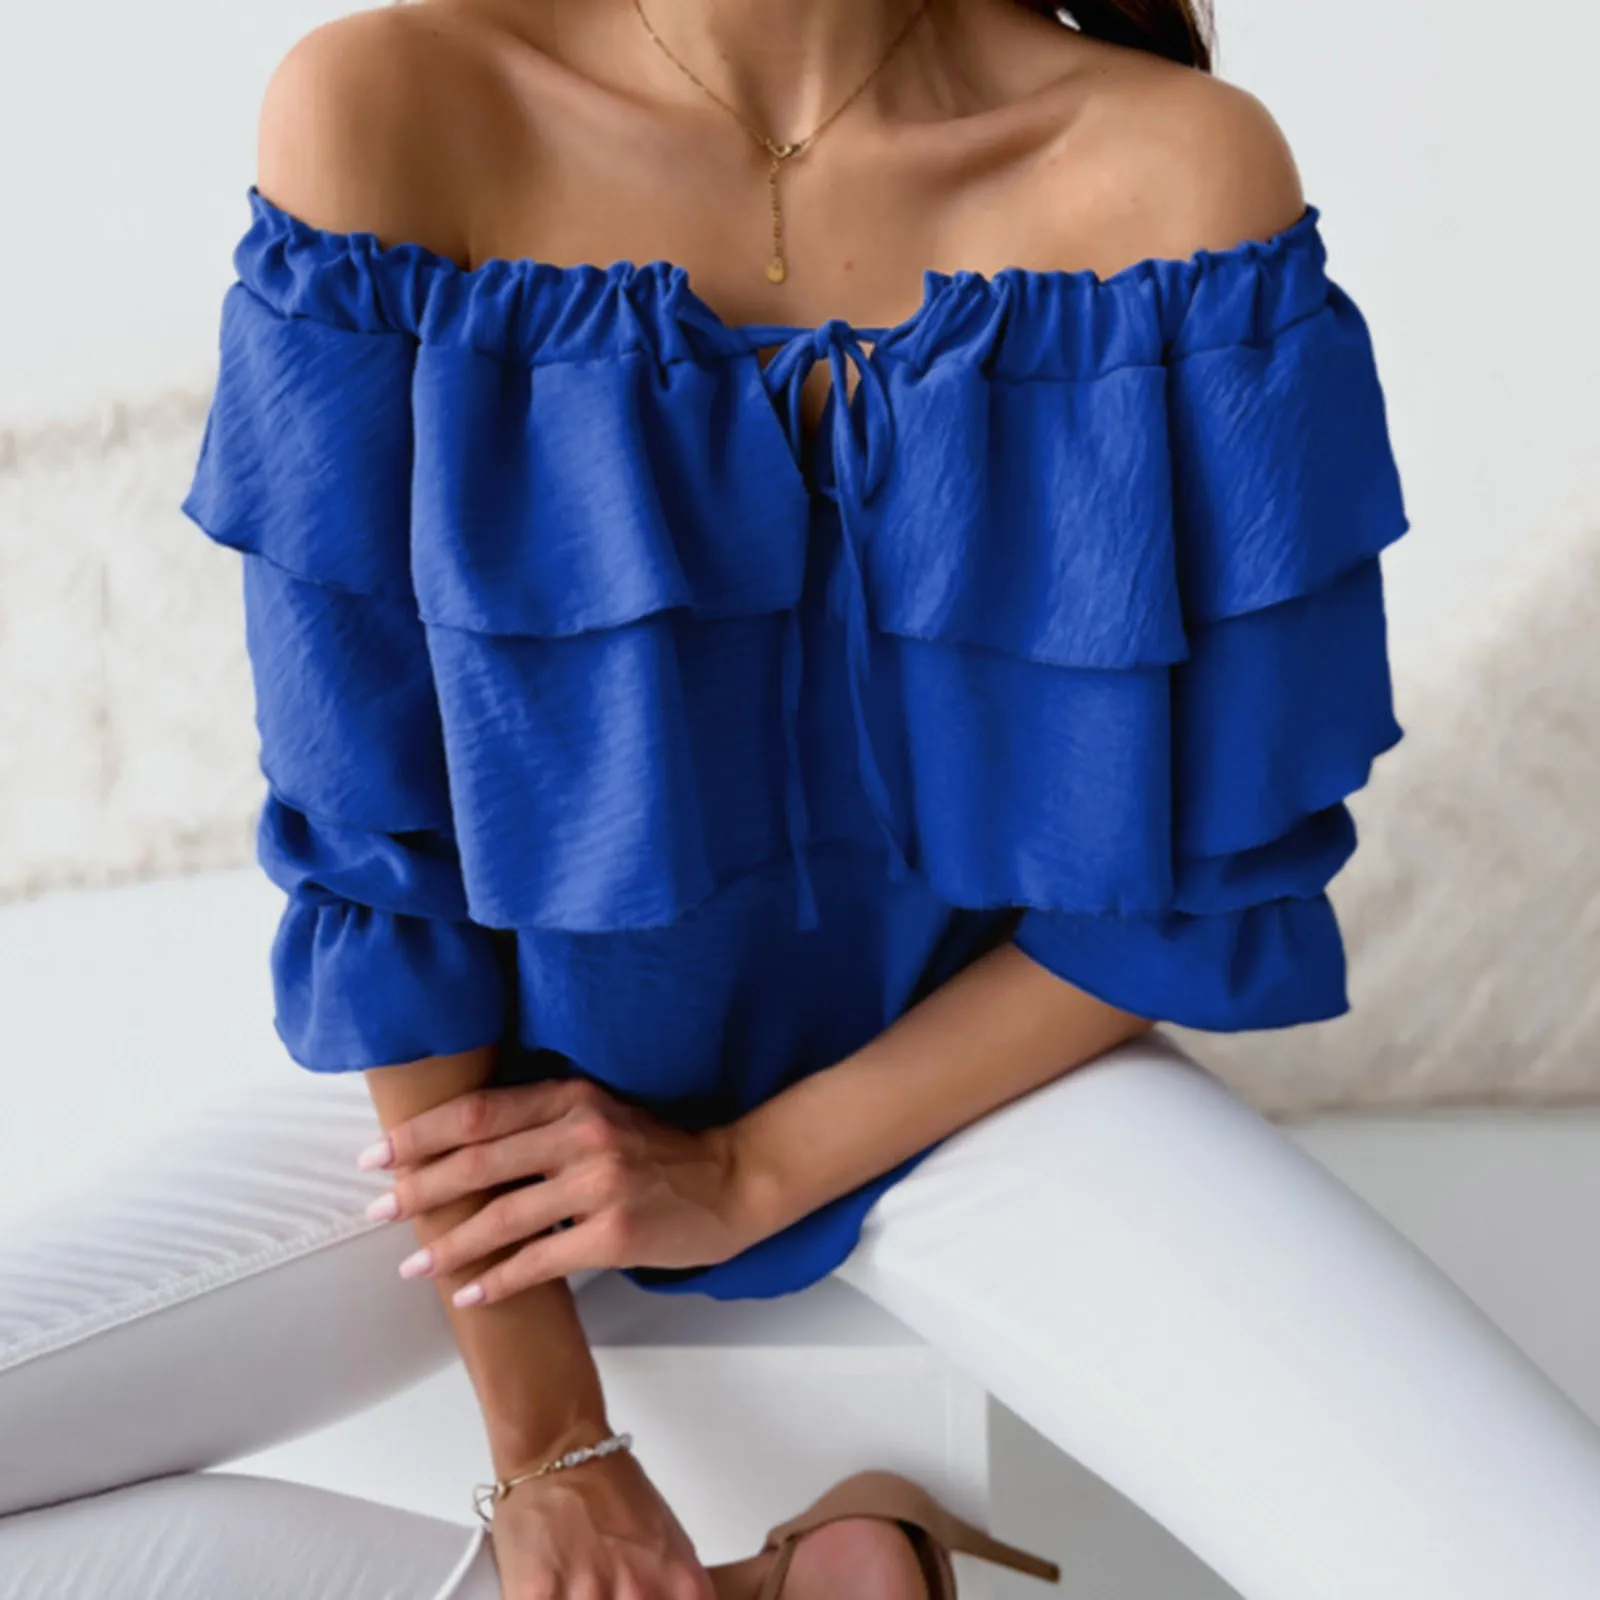 

Sexy Layered Ruffles Women Blouse Summer Fashion Off Shoulder Lace Up Strapless Boho Party Dress Shirt Ladies Pullover Top Blusa